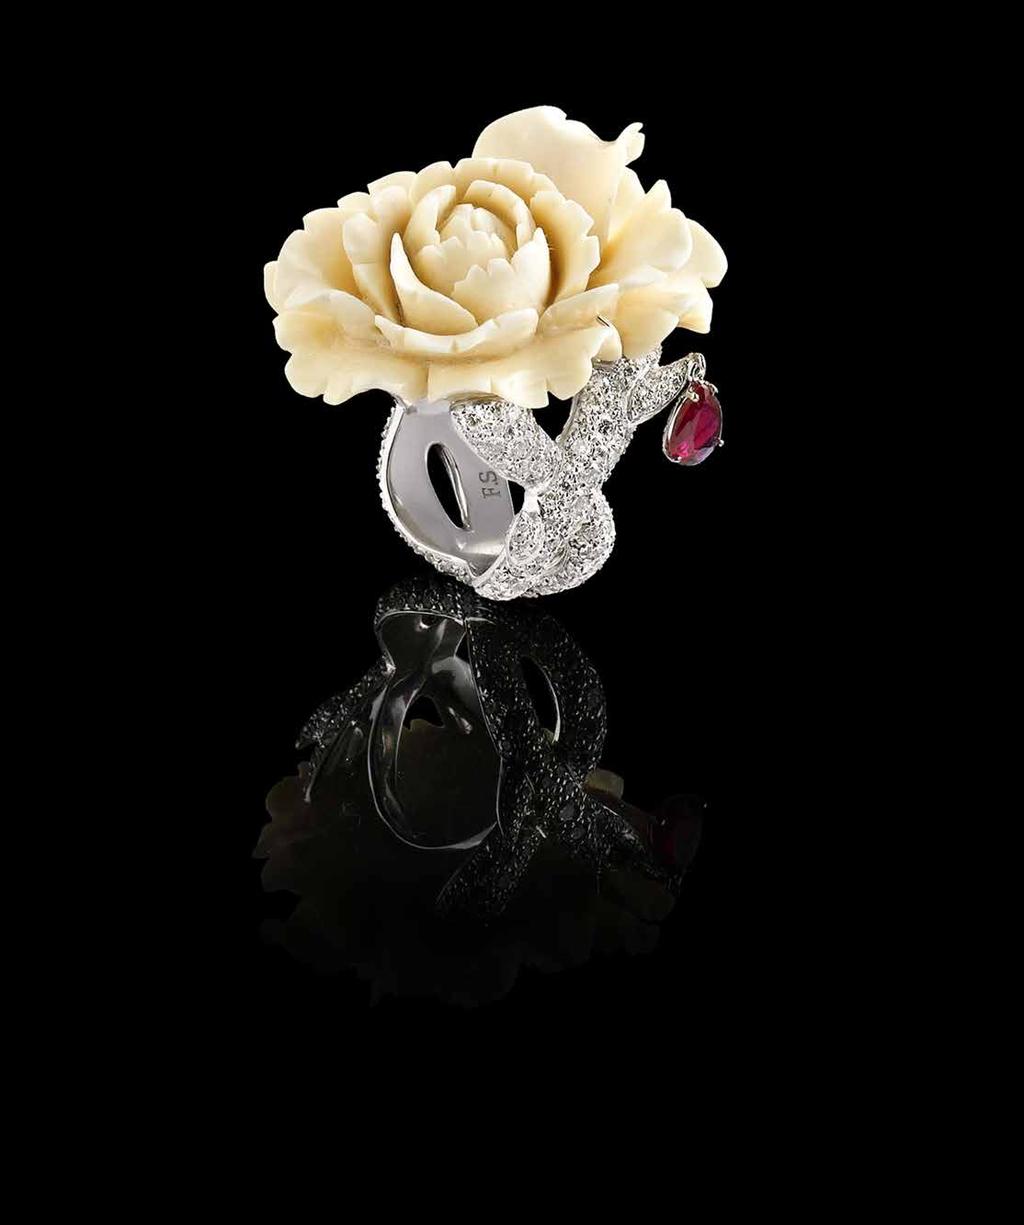 www.fabiosalini.it Ring in 18K white gold set with ivory (from Mammoth fossil), one 0.68-carat pear-shaped ruby and pavé-set diamonds (3.27cts). POA.